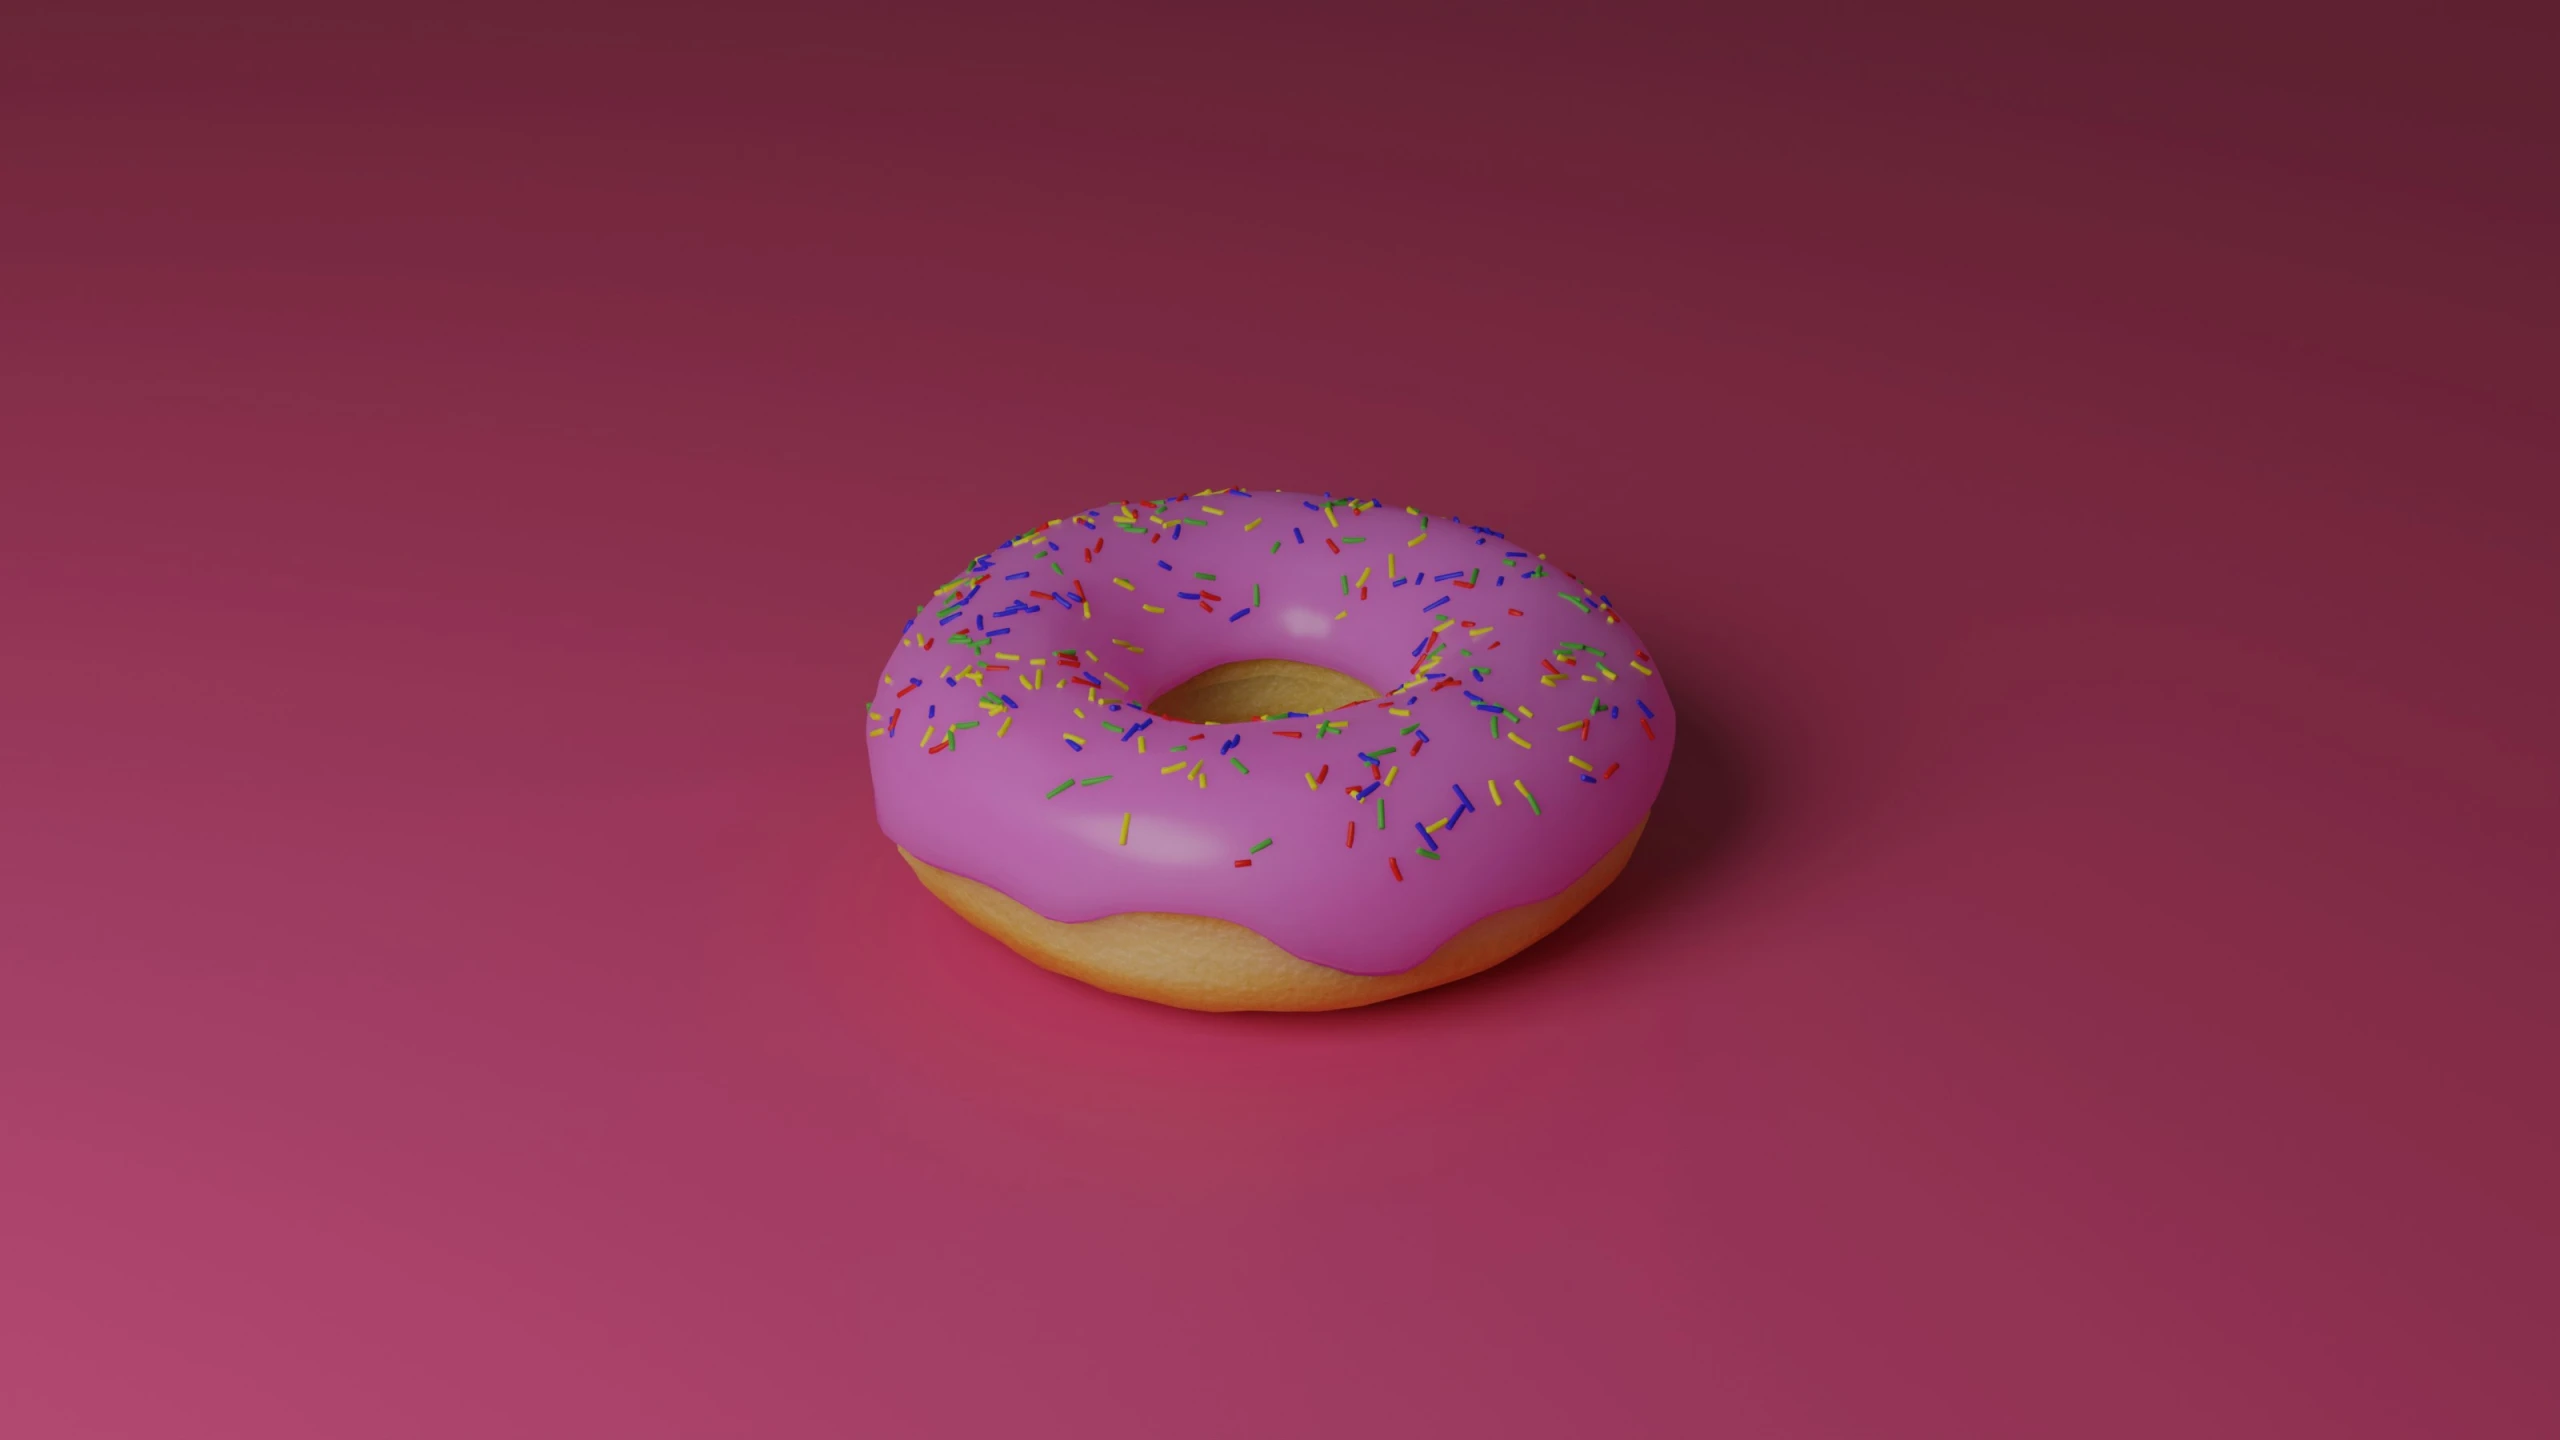 a donut on the ground has been pastel pink with colorful sprinkles